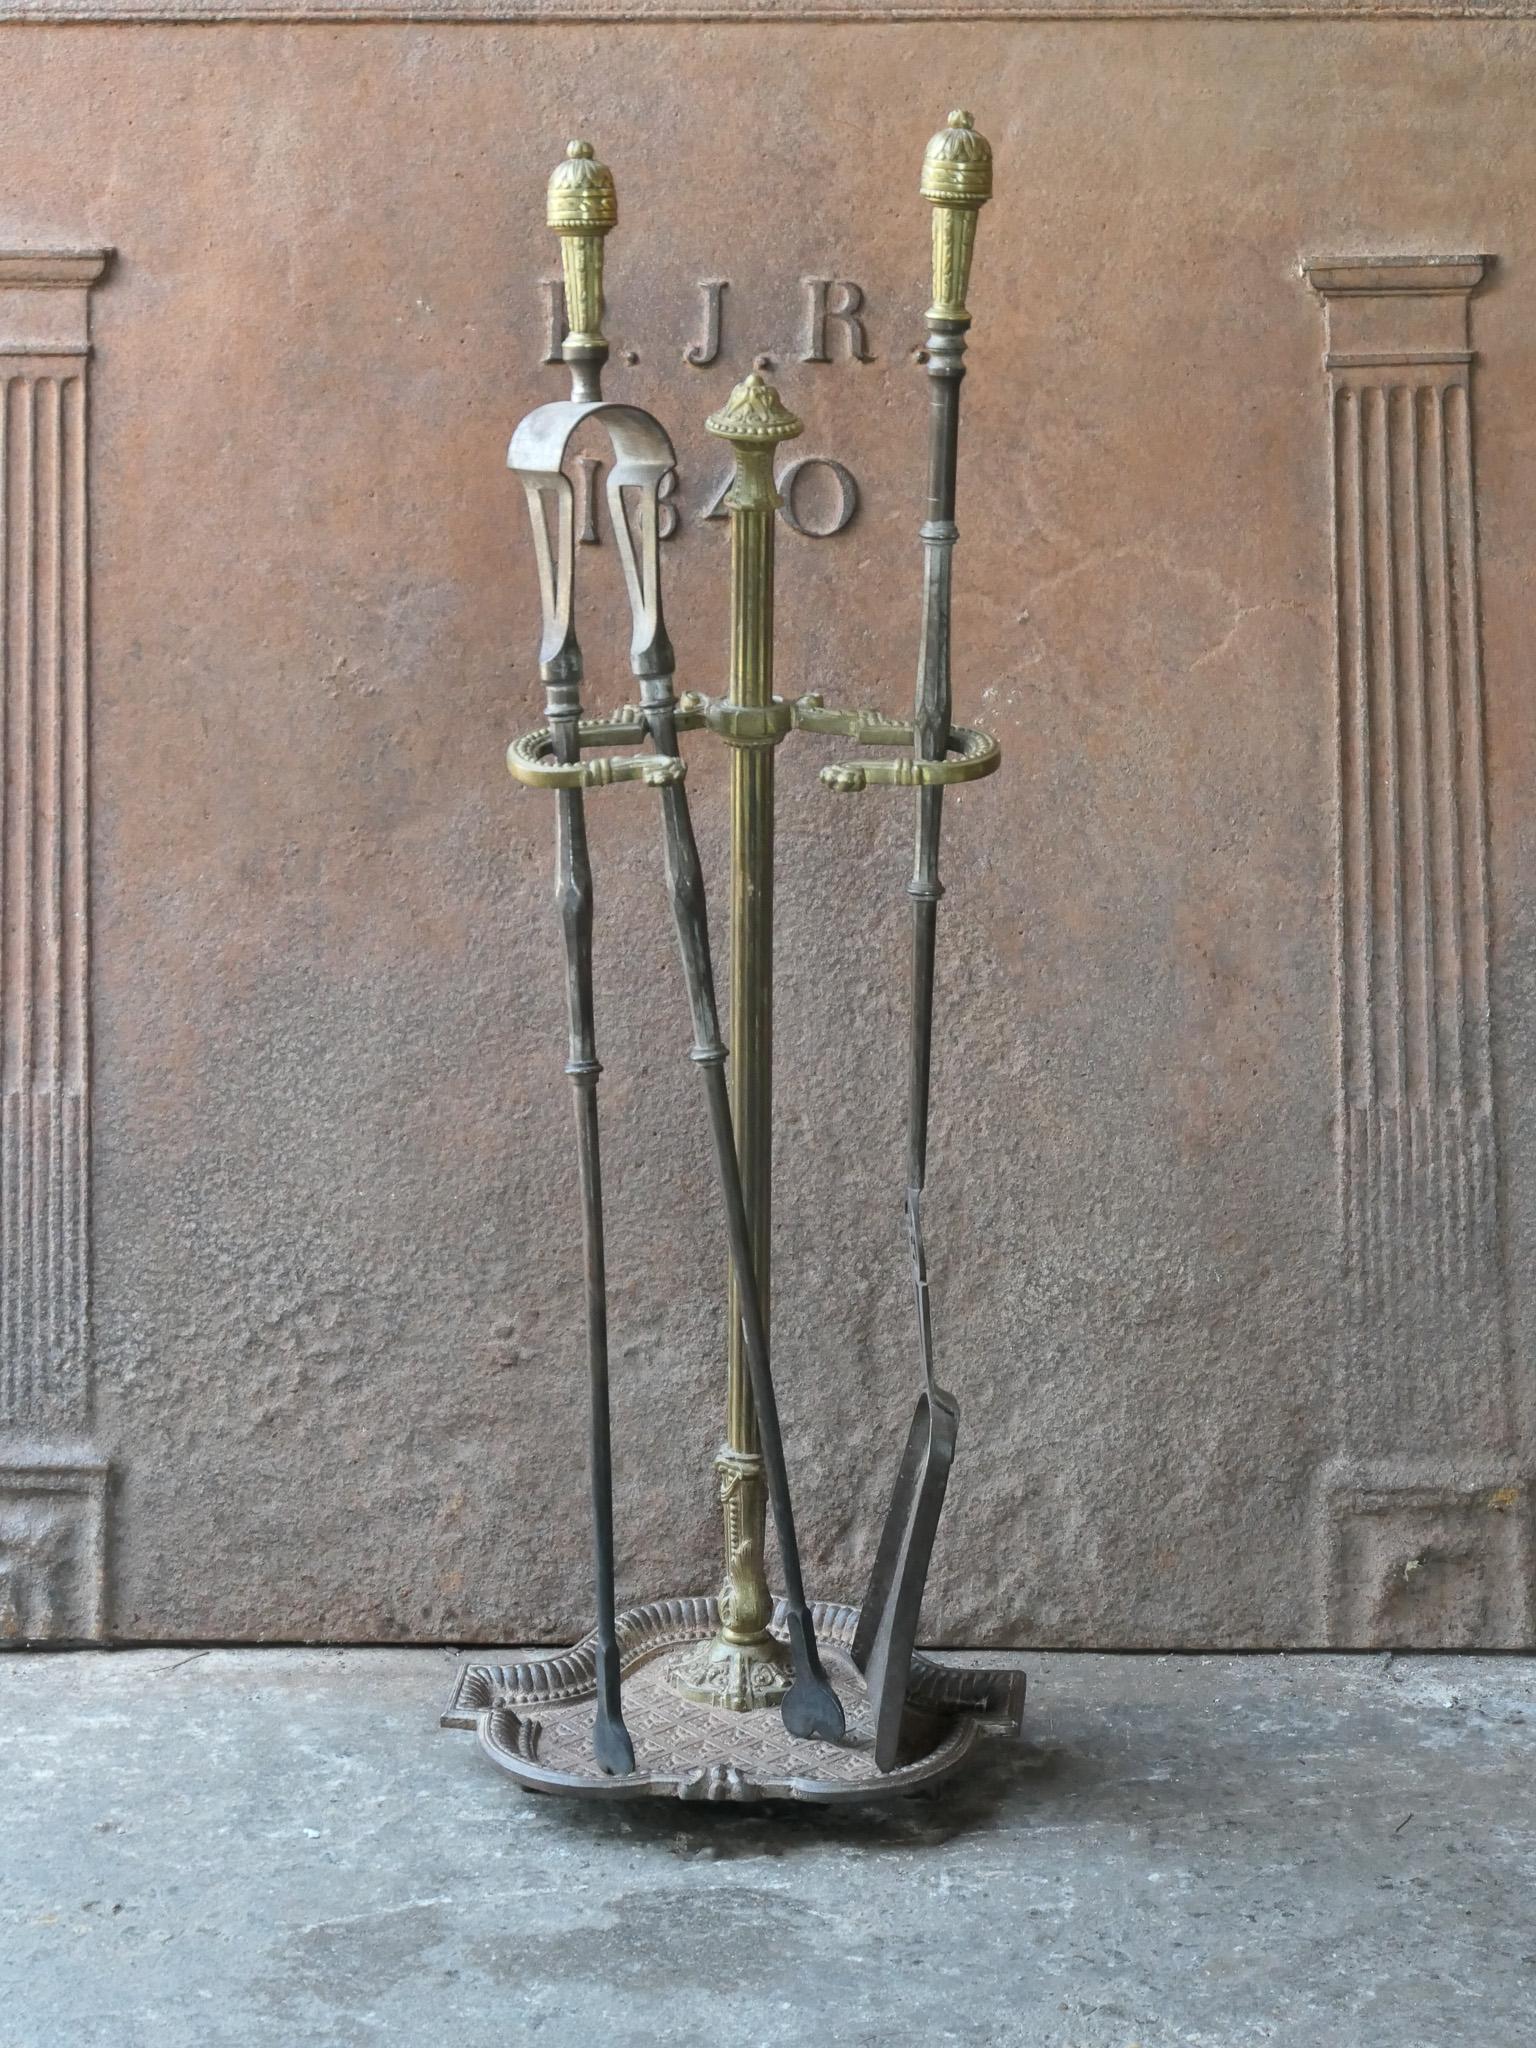 Beautiful 18th - 19th century French neoclassical fireplace tool set. The tool set consists of tongs, shovel and stand. The stand is made of cast iron and brass and the tools are made of wrought iron and brass. The set is in a good condition and fit